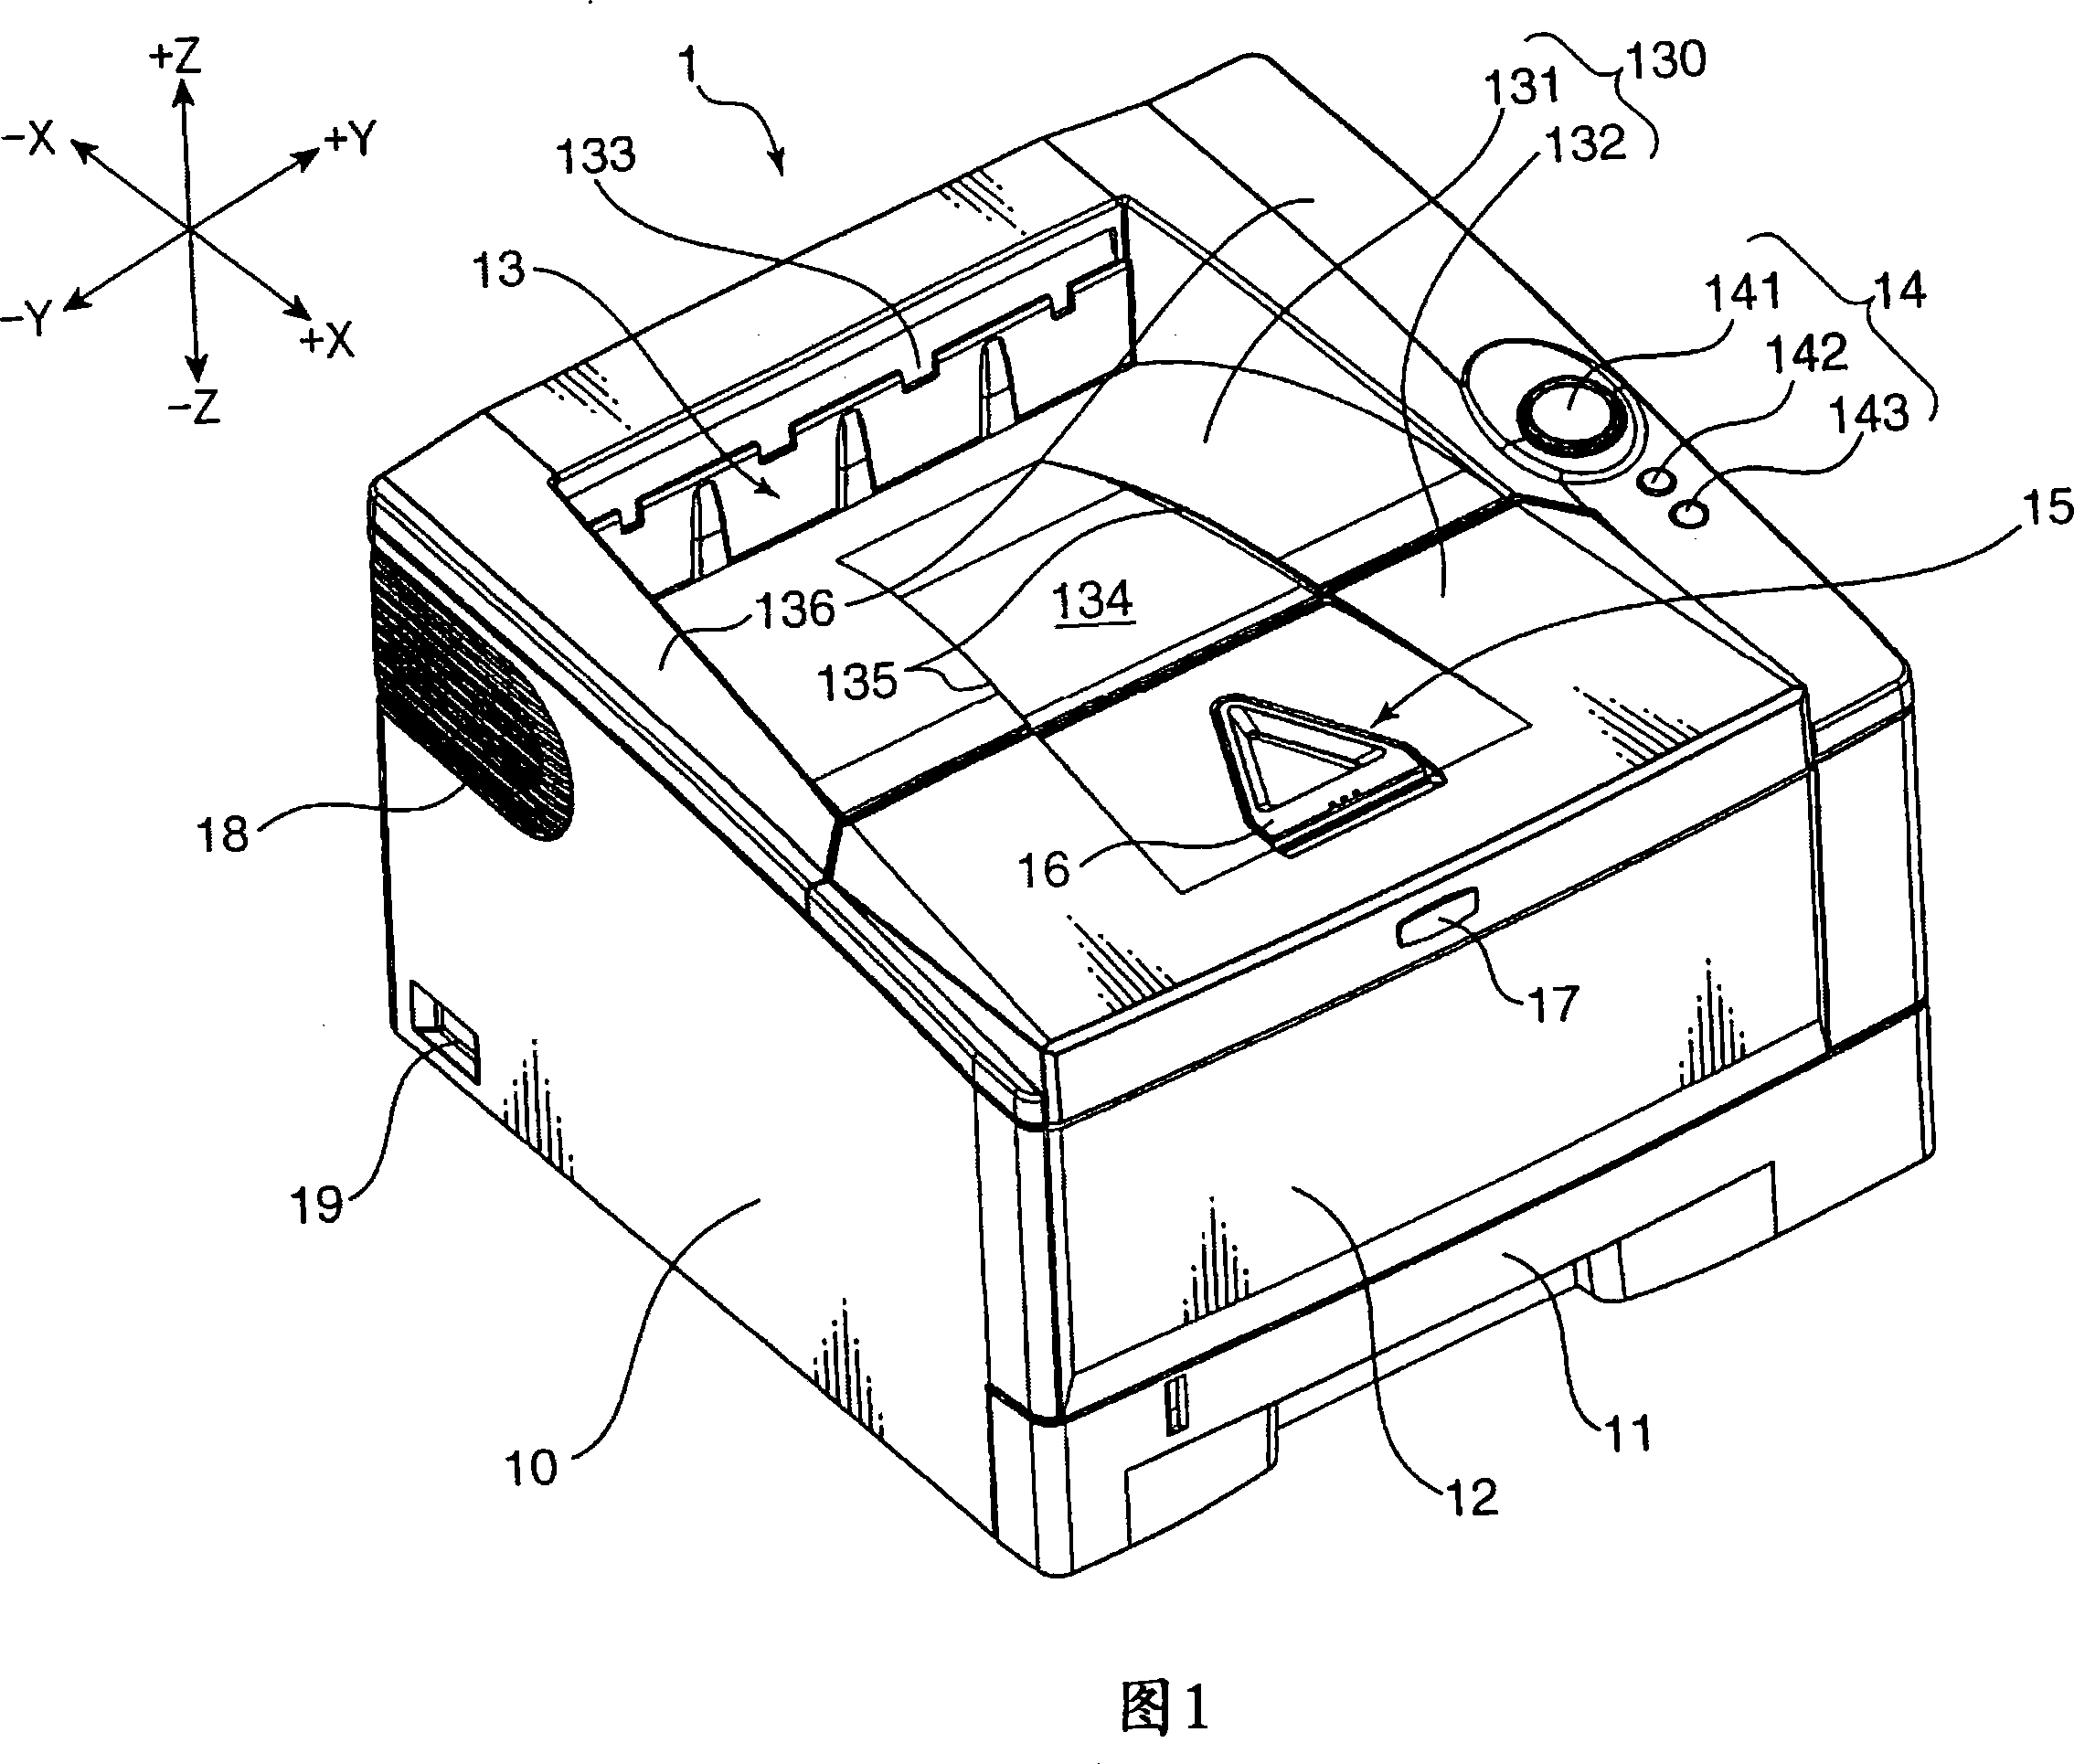 Image forming apparatus and apparatus for receiving consumable supplying member